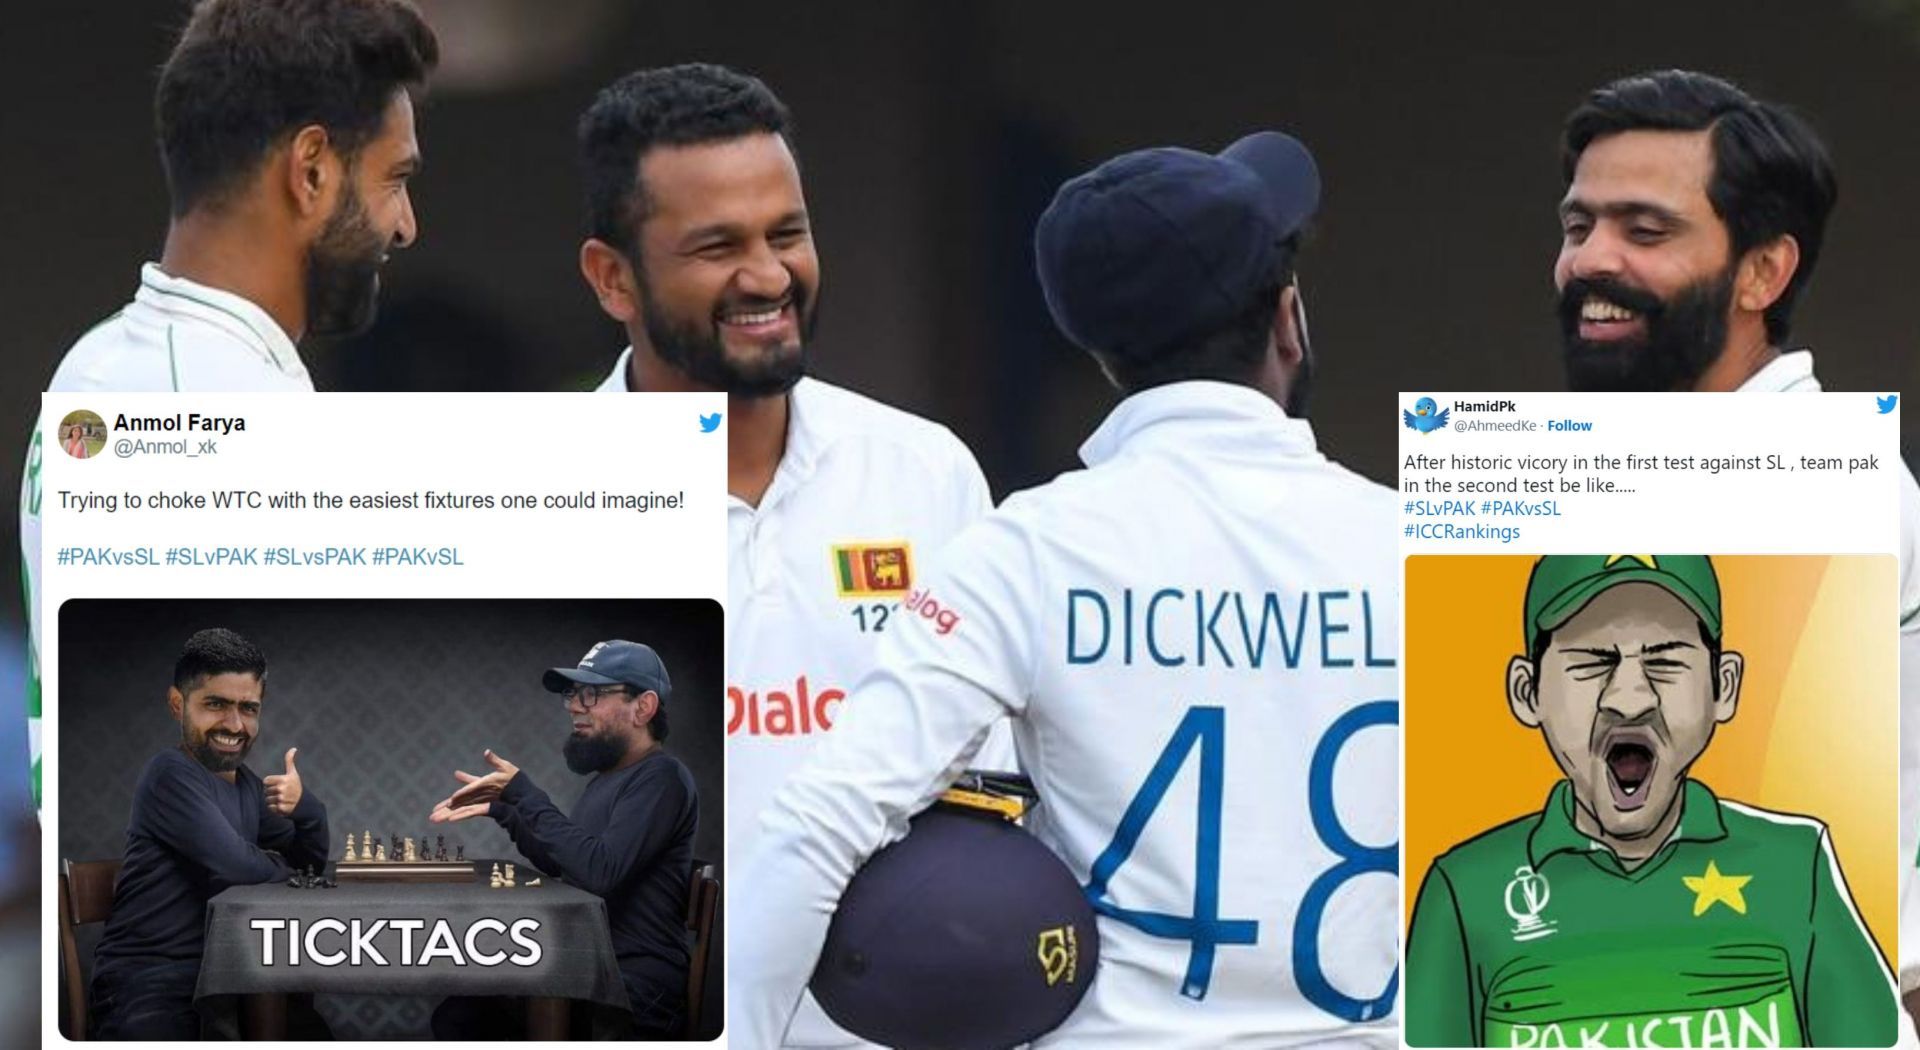 Top 10 memes after Day 4 of the 2nd Test in Galle.